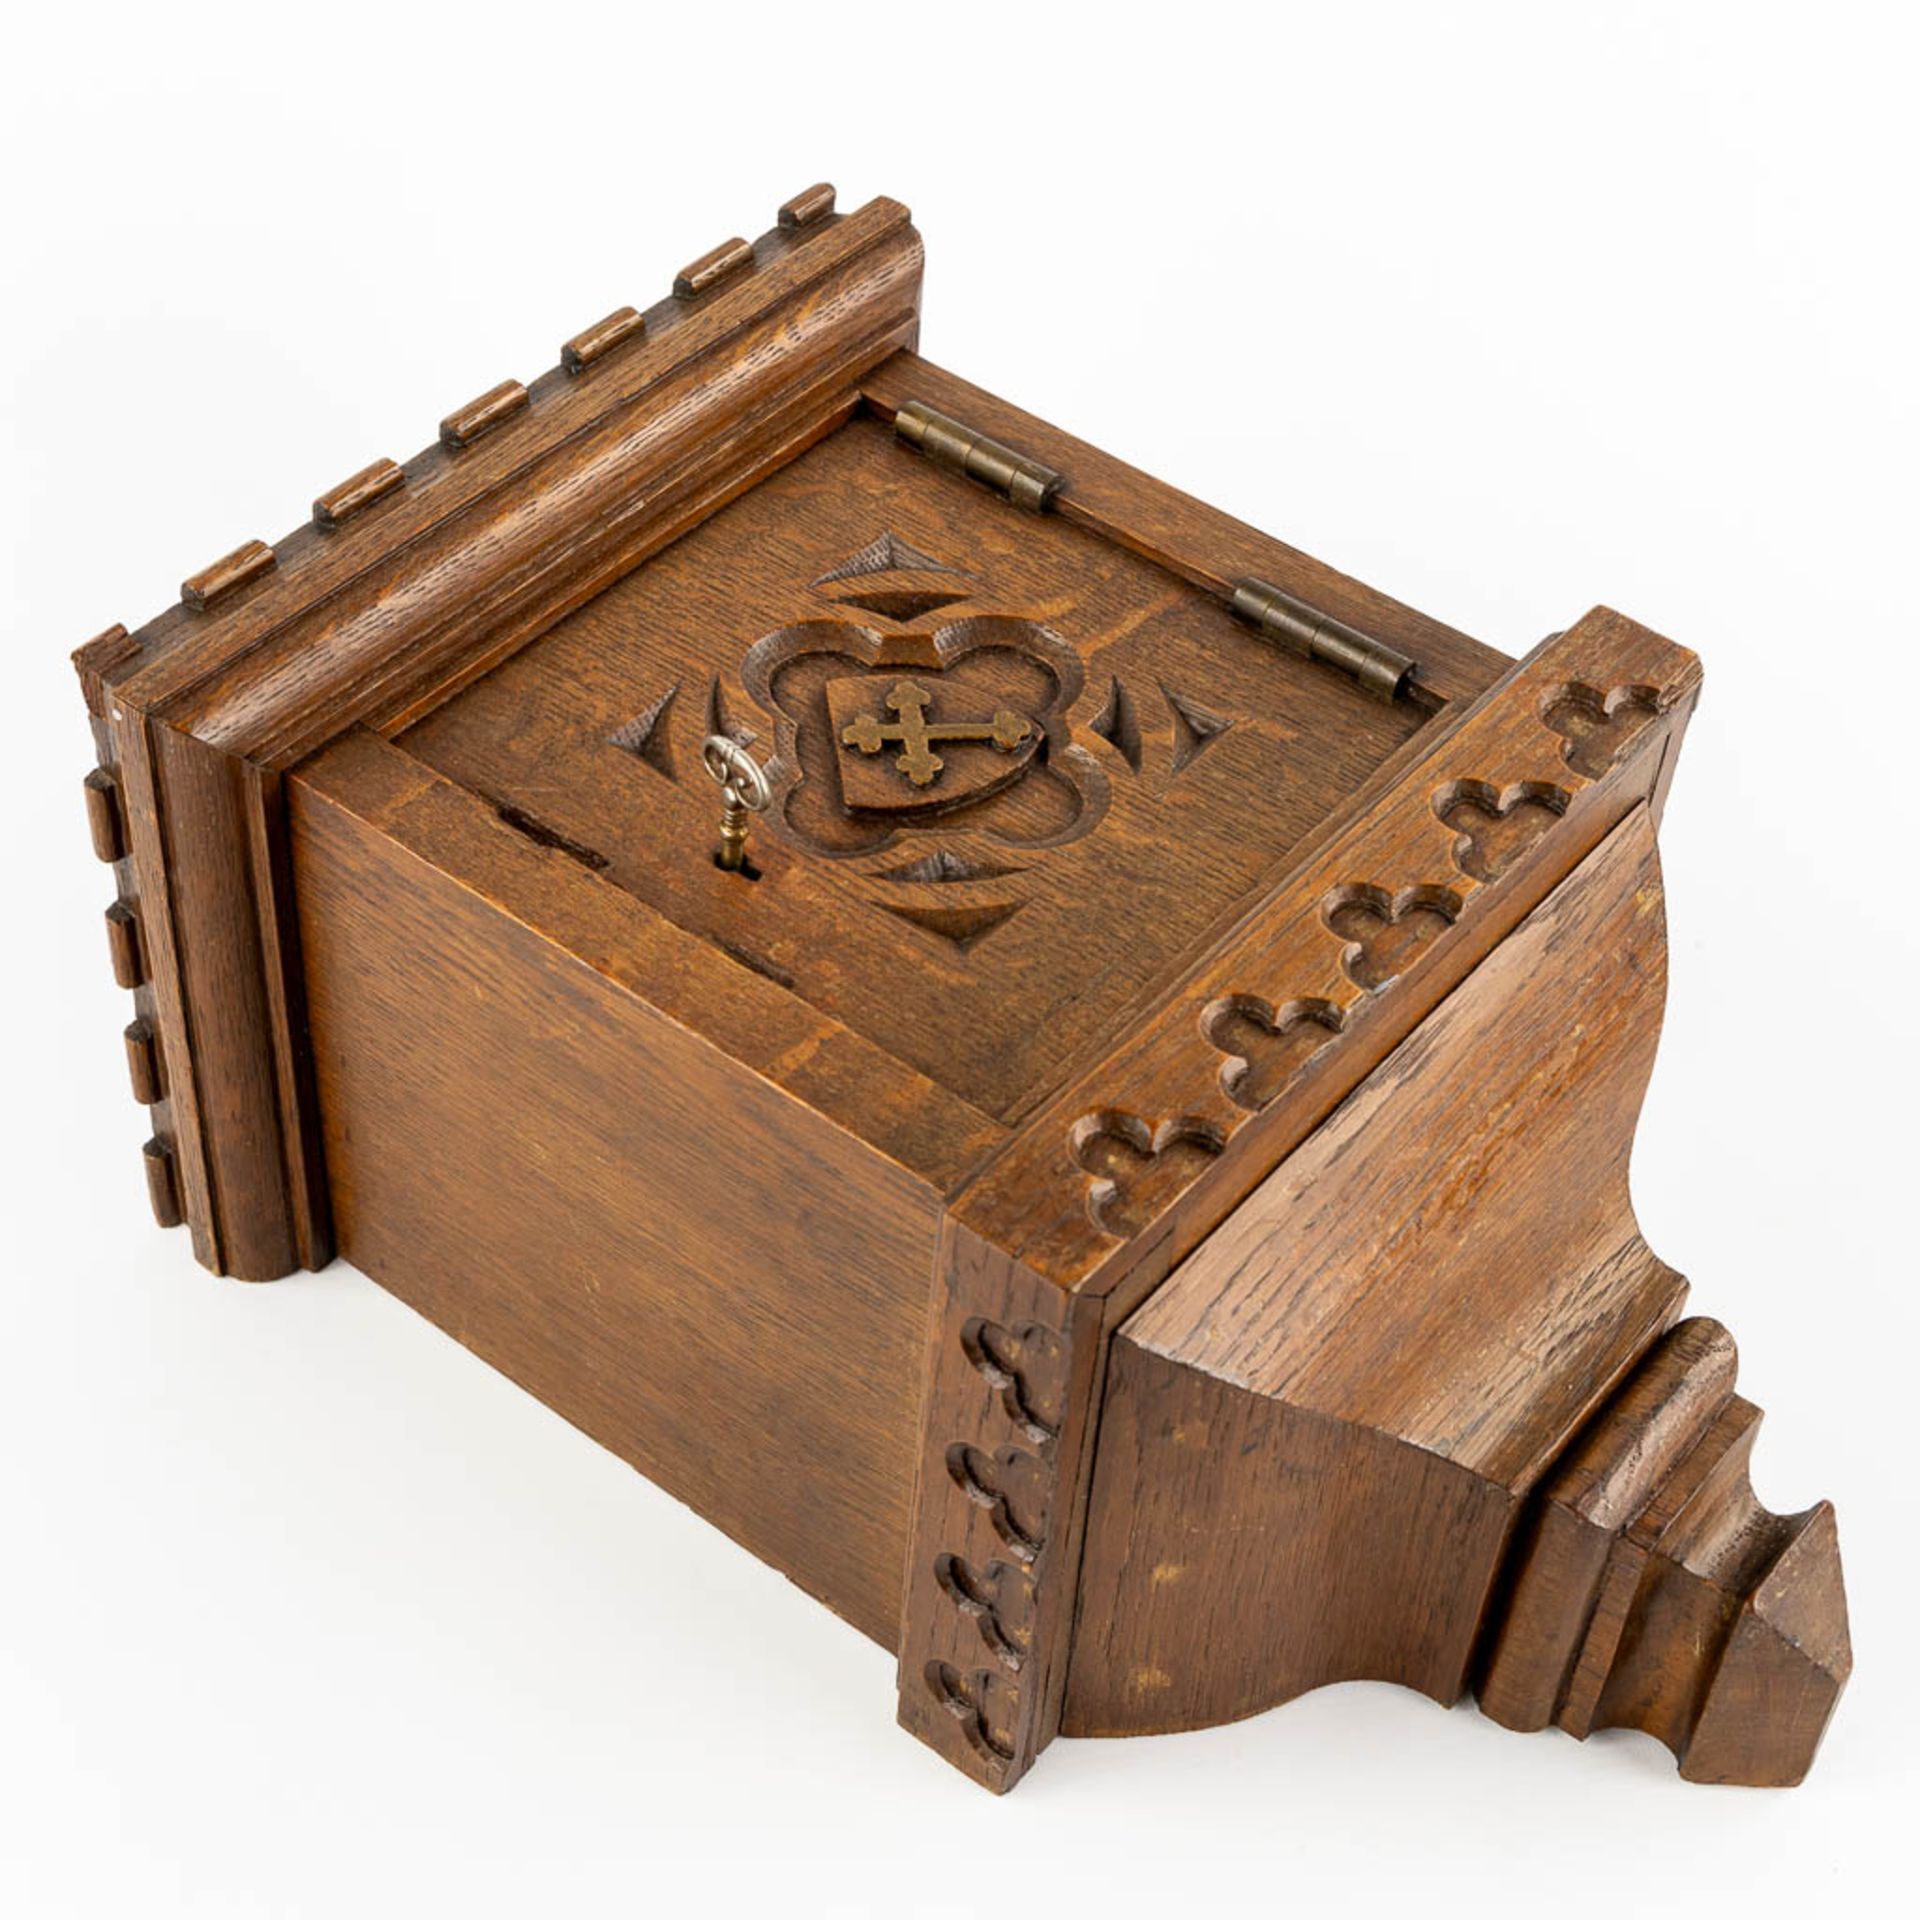 An Offertory or Poor box, sculptured oak, gothic revival. (L:20 x W:27 x H:42 cm) - Image 5 of 11